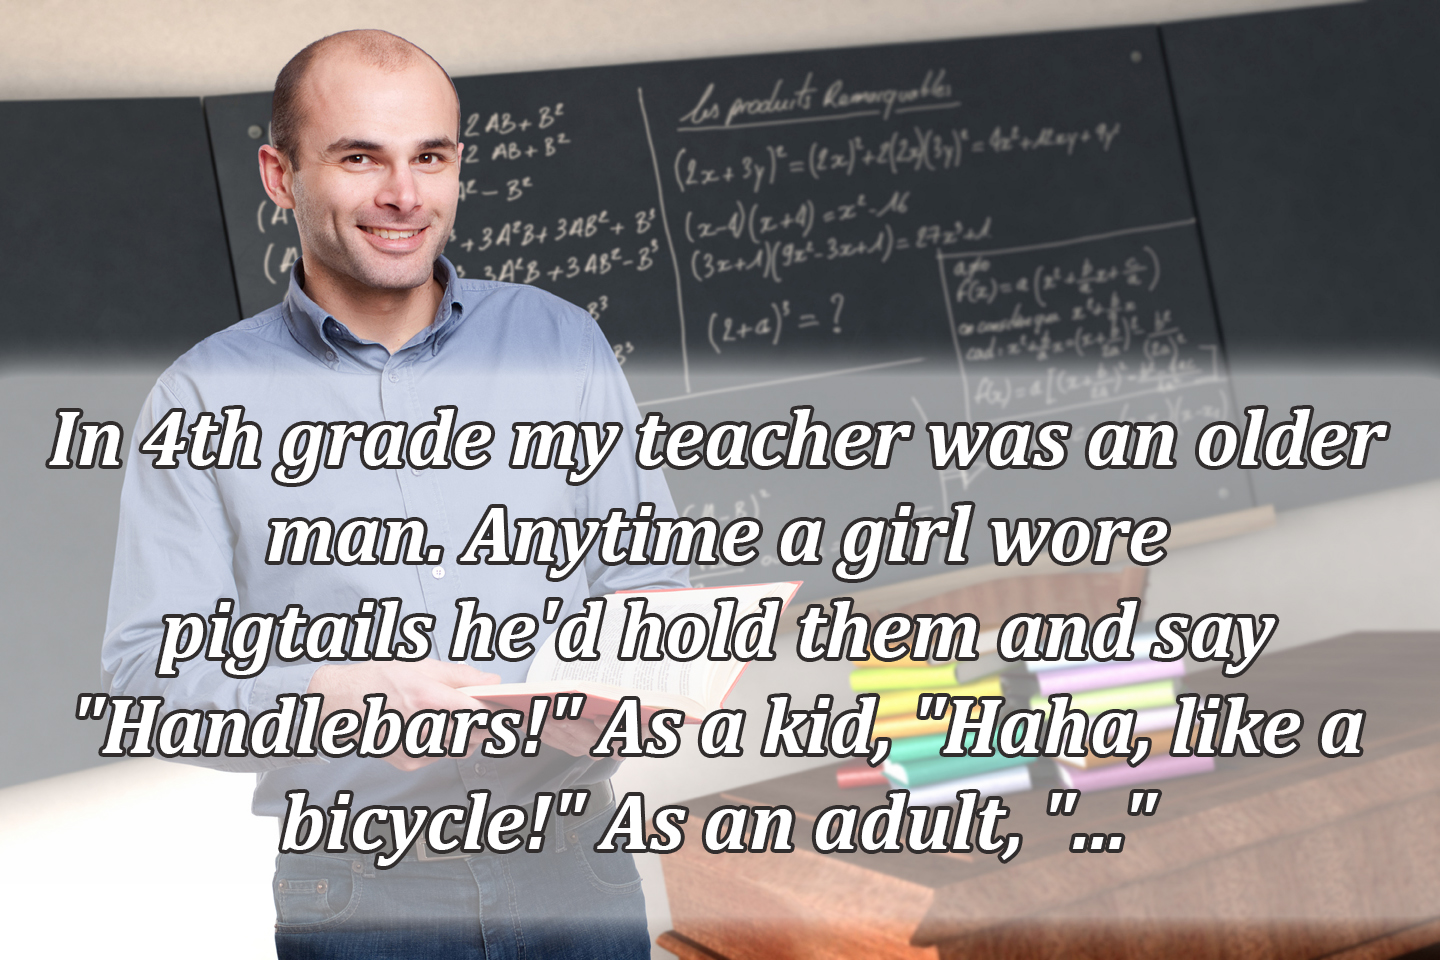 People Describe The Most Abhorrent Things Teachers Did or Said